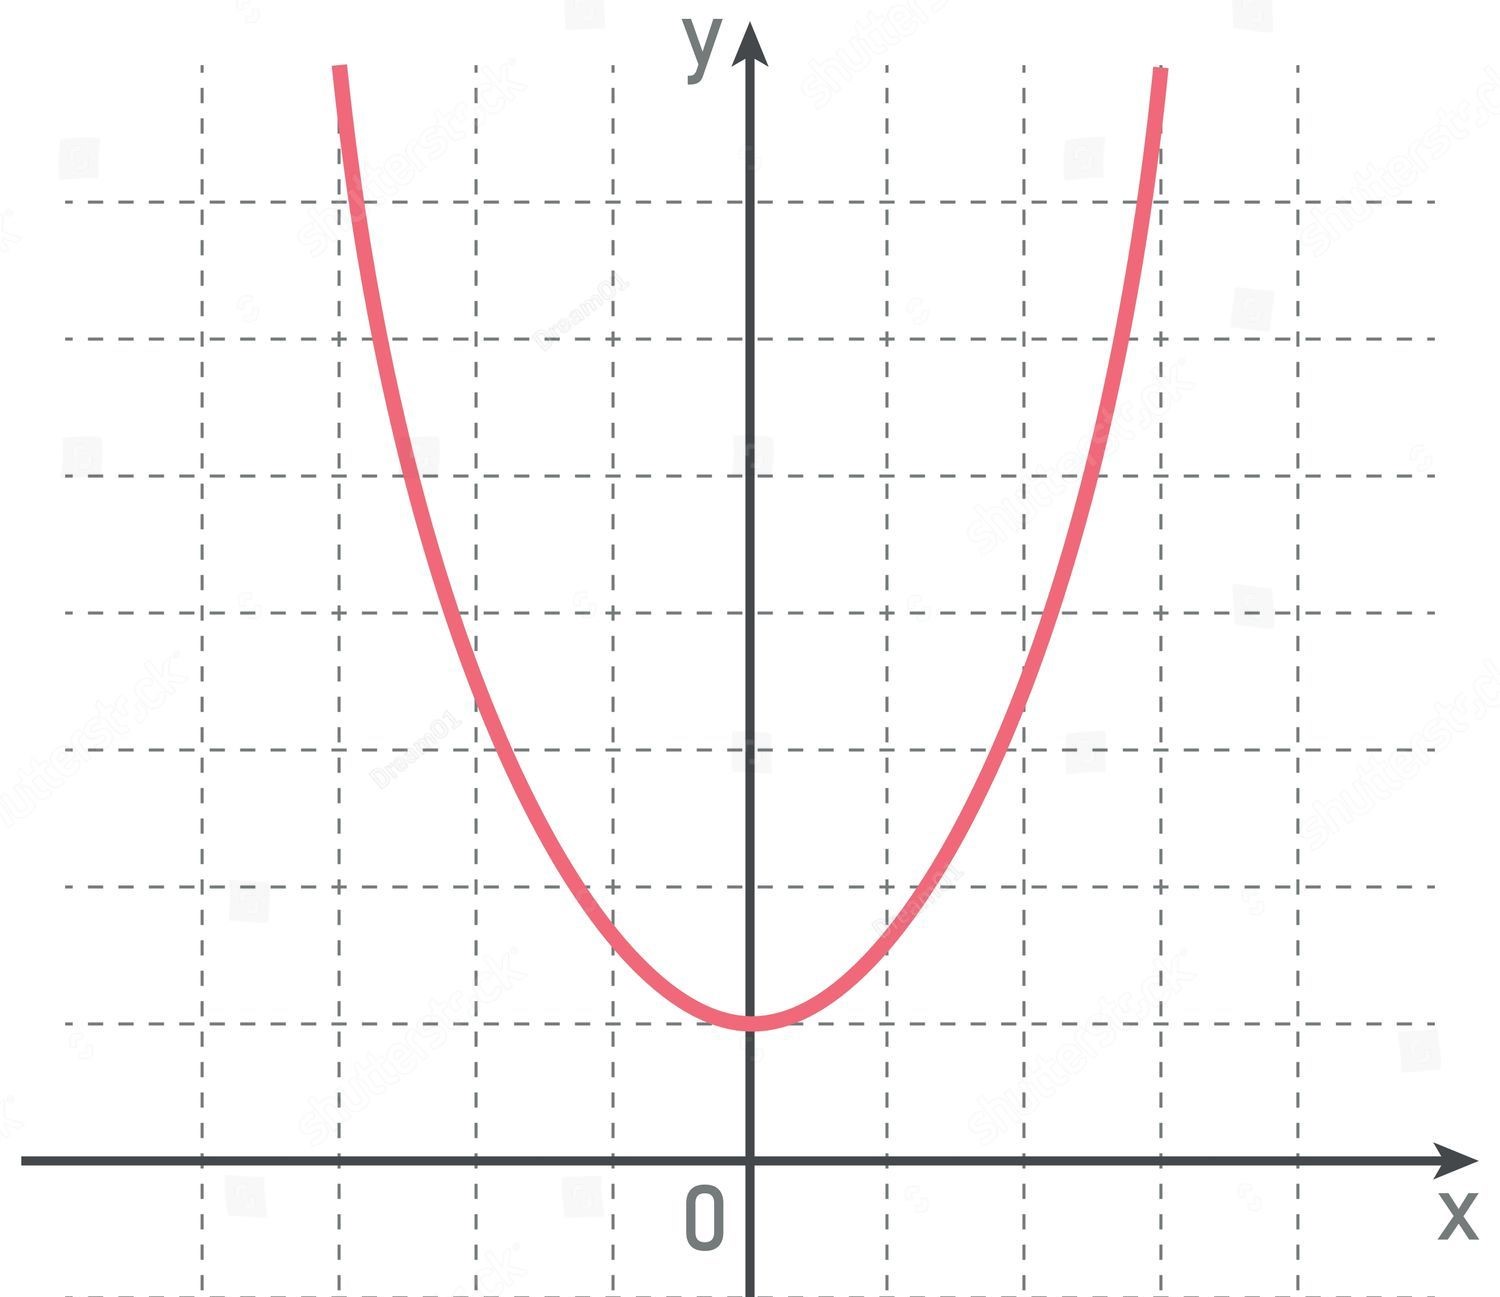 How To Determine The End Behavior Of A Function